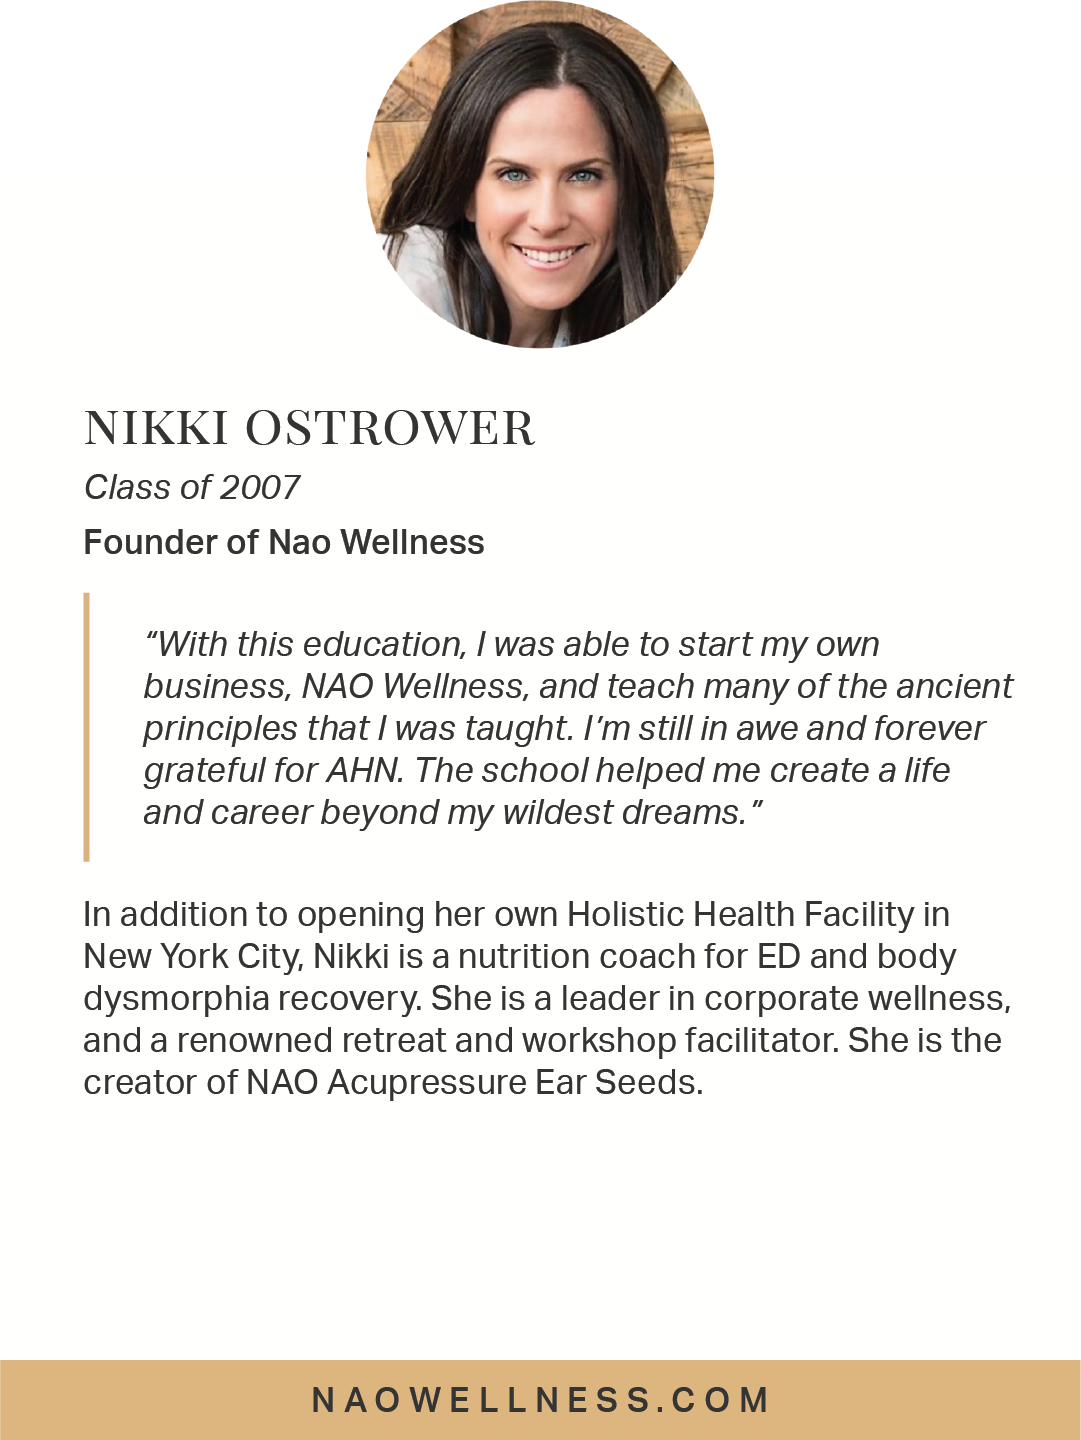  In addition to opening her own Holistic Health Facility in NYC, Nikki is a nutrition coach for ED and body dysmorphia recovery, a leader in corporate wellness, and a renowned retreat facilitator. She is the creator of NAO Acupressure Ear Seeds. 